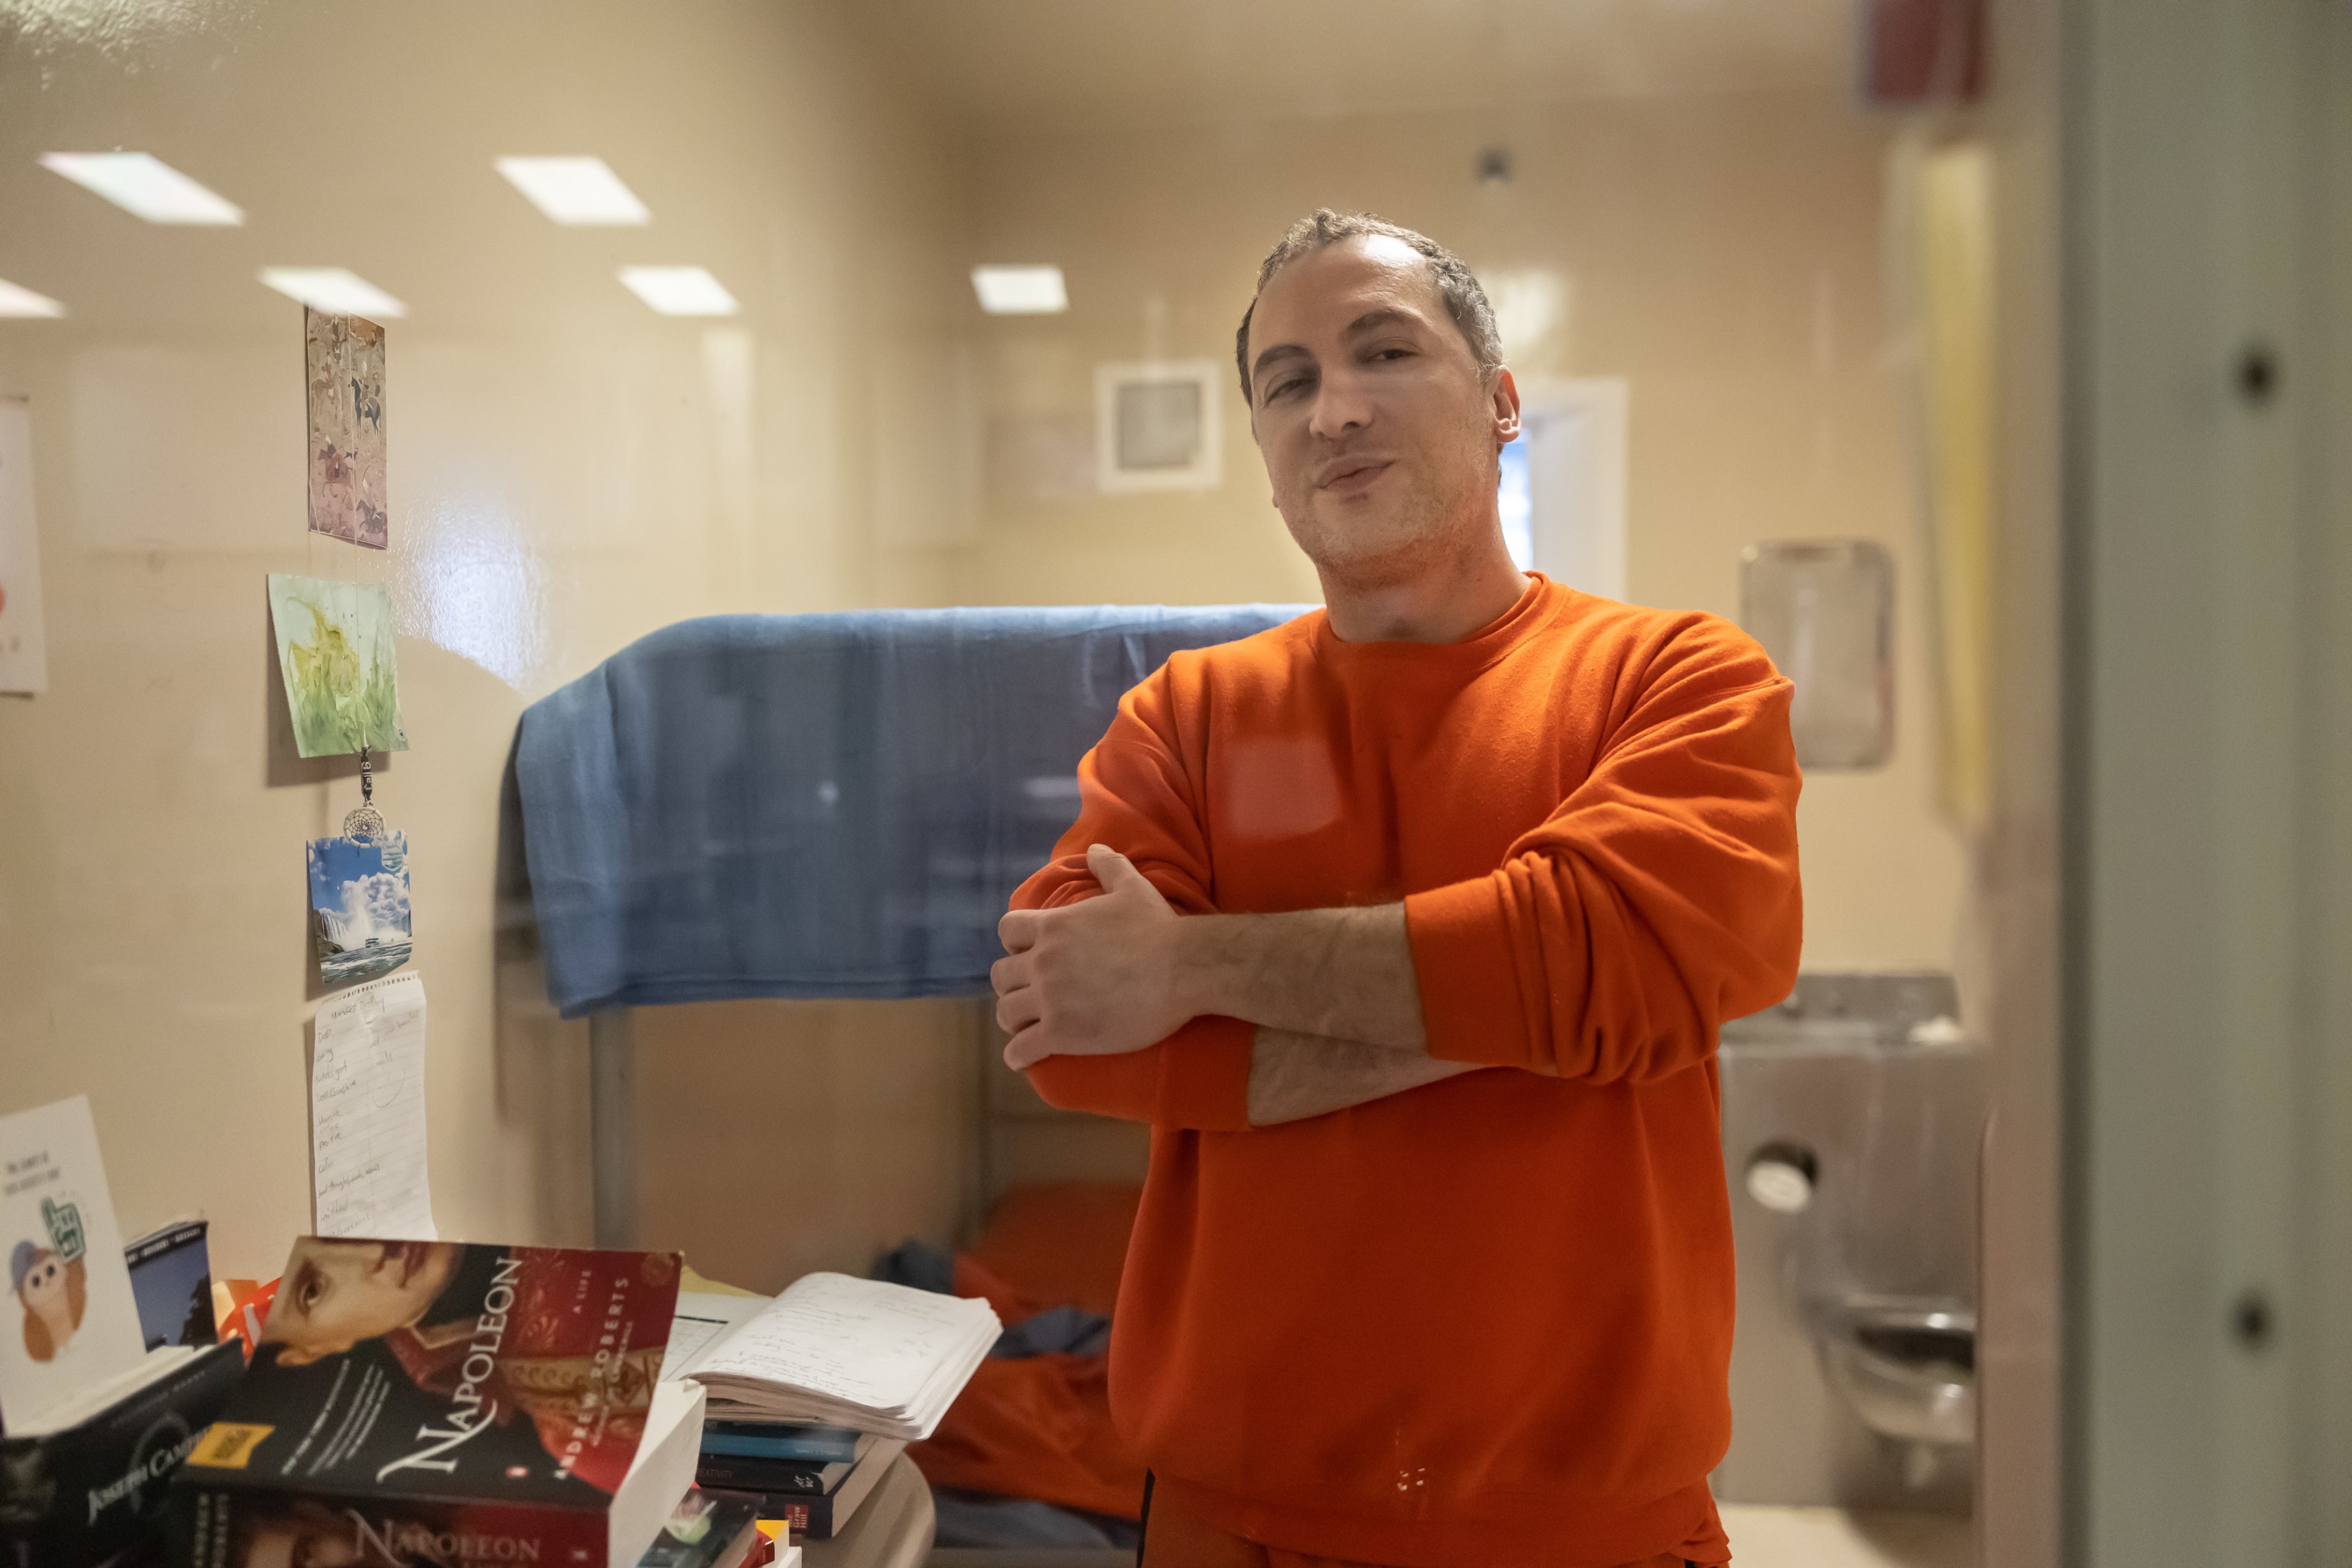 Jail inmate Nima Momeni, suspect for the killing of Cash App founder Bob Lee, while dressed in an orange sweatshirt and sweatpants crosses his arms while looking out the window of his jail cell.